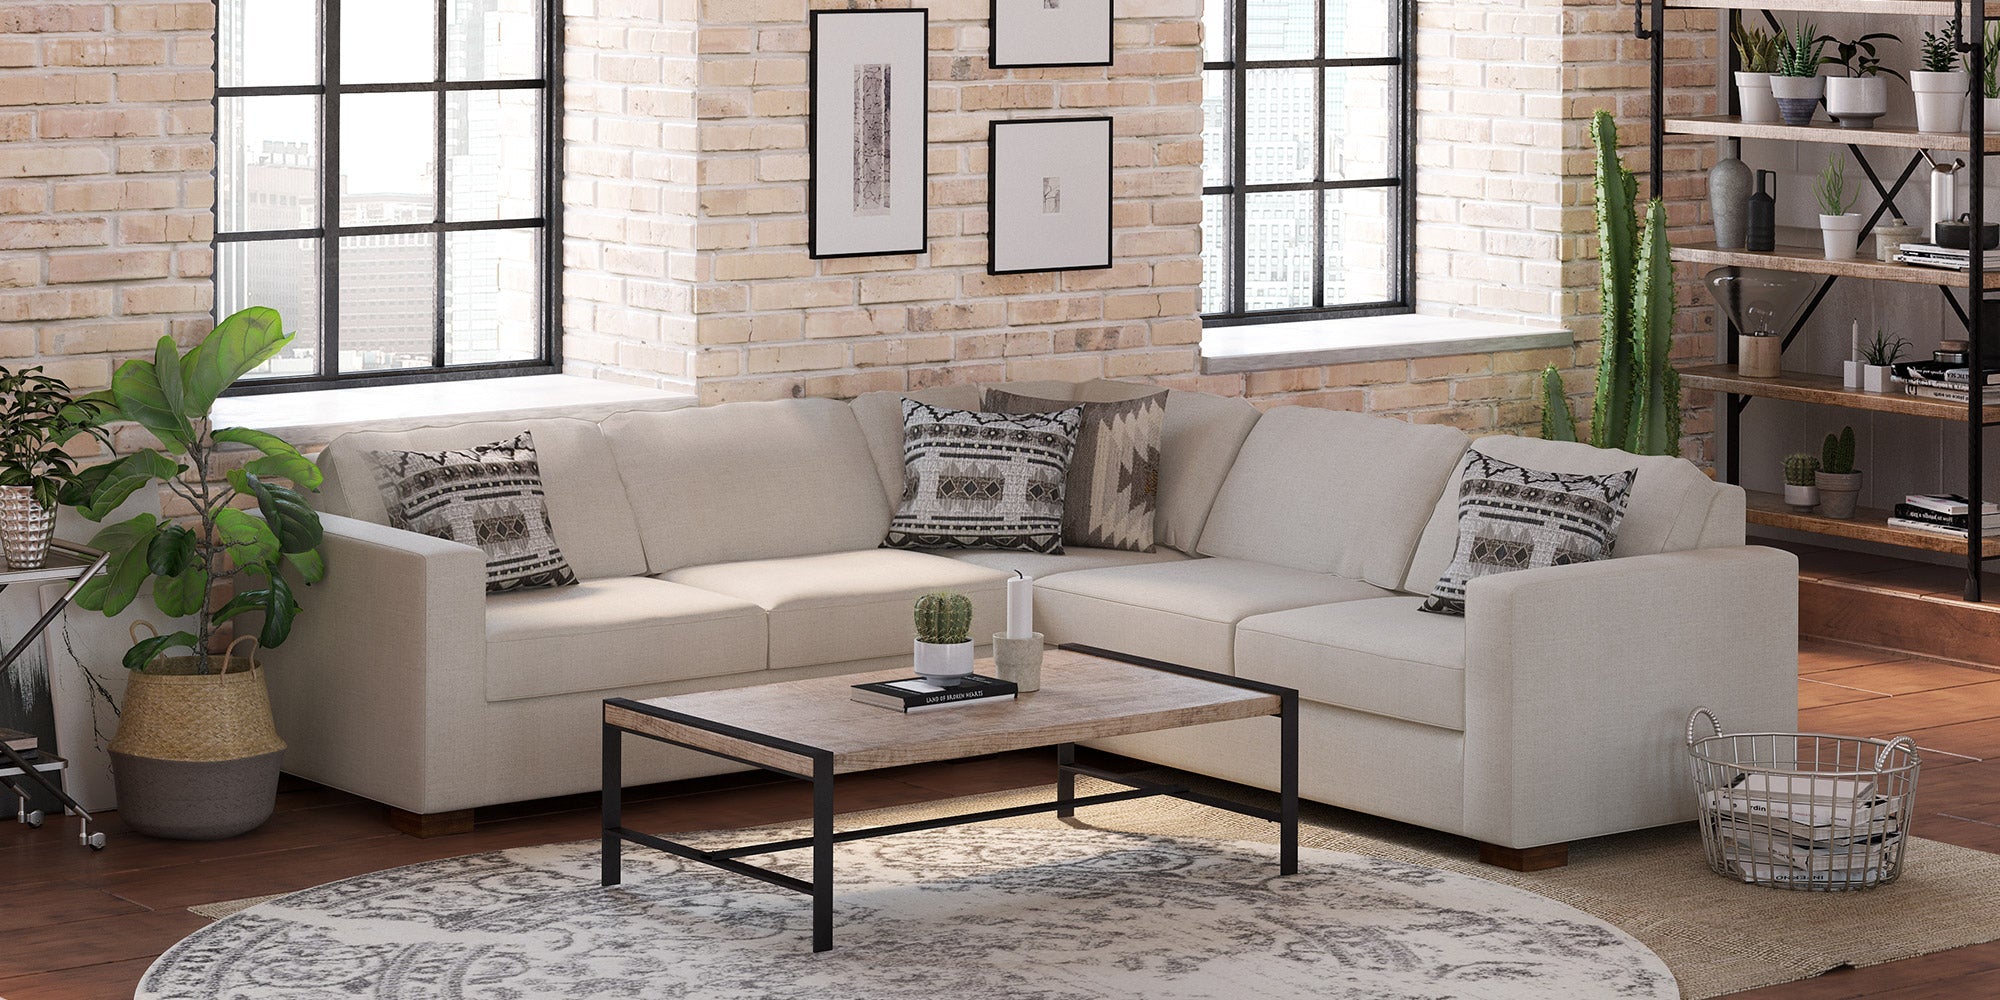 IRL: Rio Corner Queen Sleeper Sectional, shown here in Texture Oyster fabric and Dave Cafe legs.